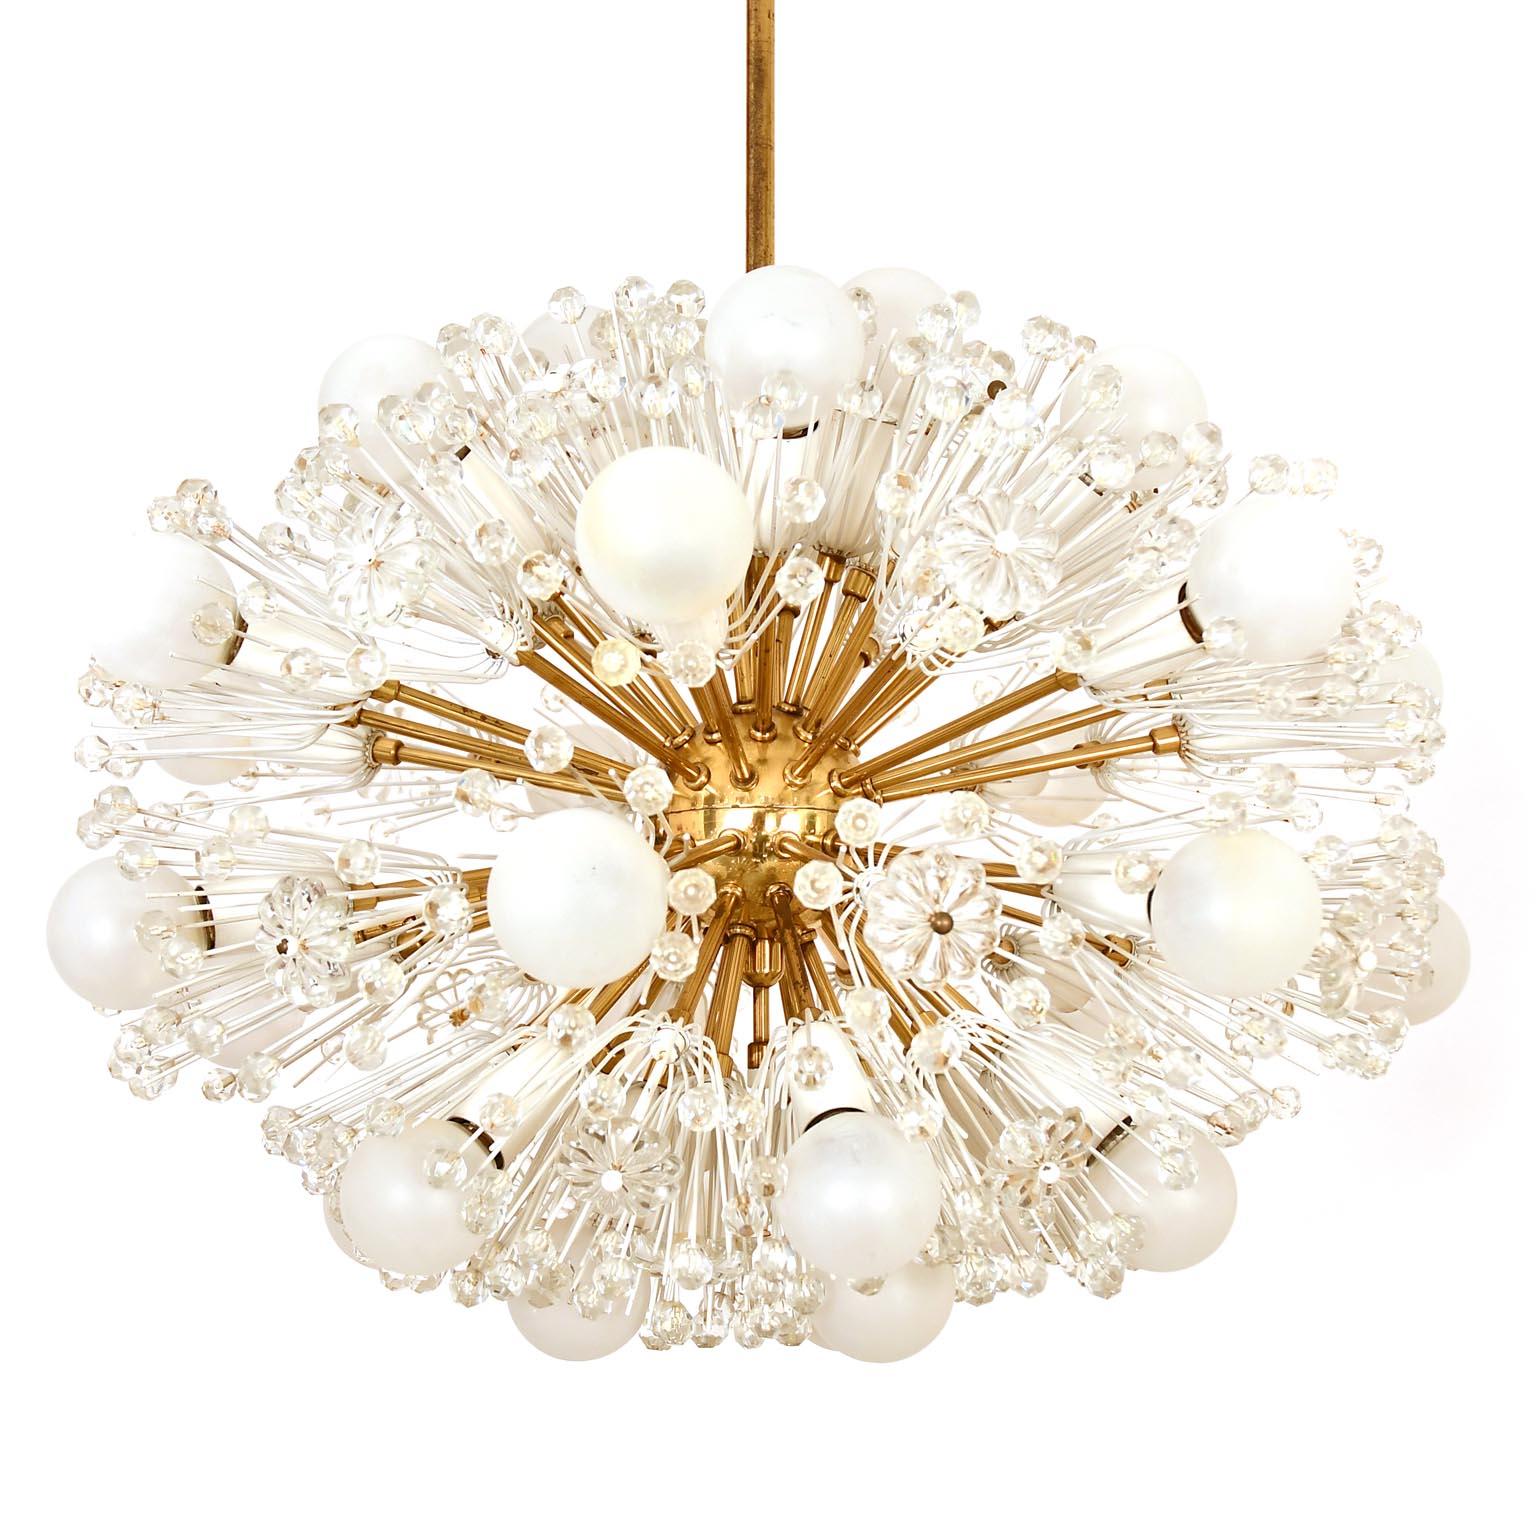 Sputnik chandelier designed by Emil Stejnar in Vienna / Austria, executed by Rupert Nikoll. Brass base, the thin tiny metal rod are painted white. Fine original condition.
Born in 1939, the trained goldsmith and silversmith designed a very similar